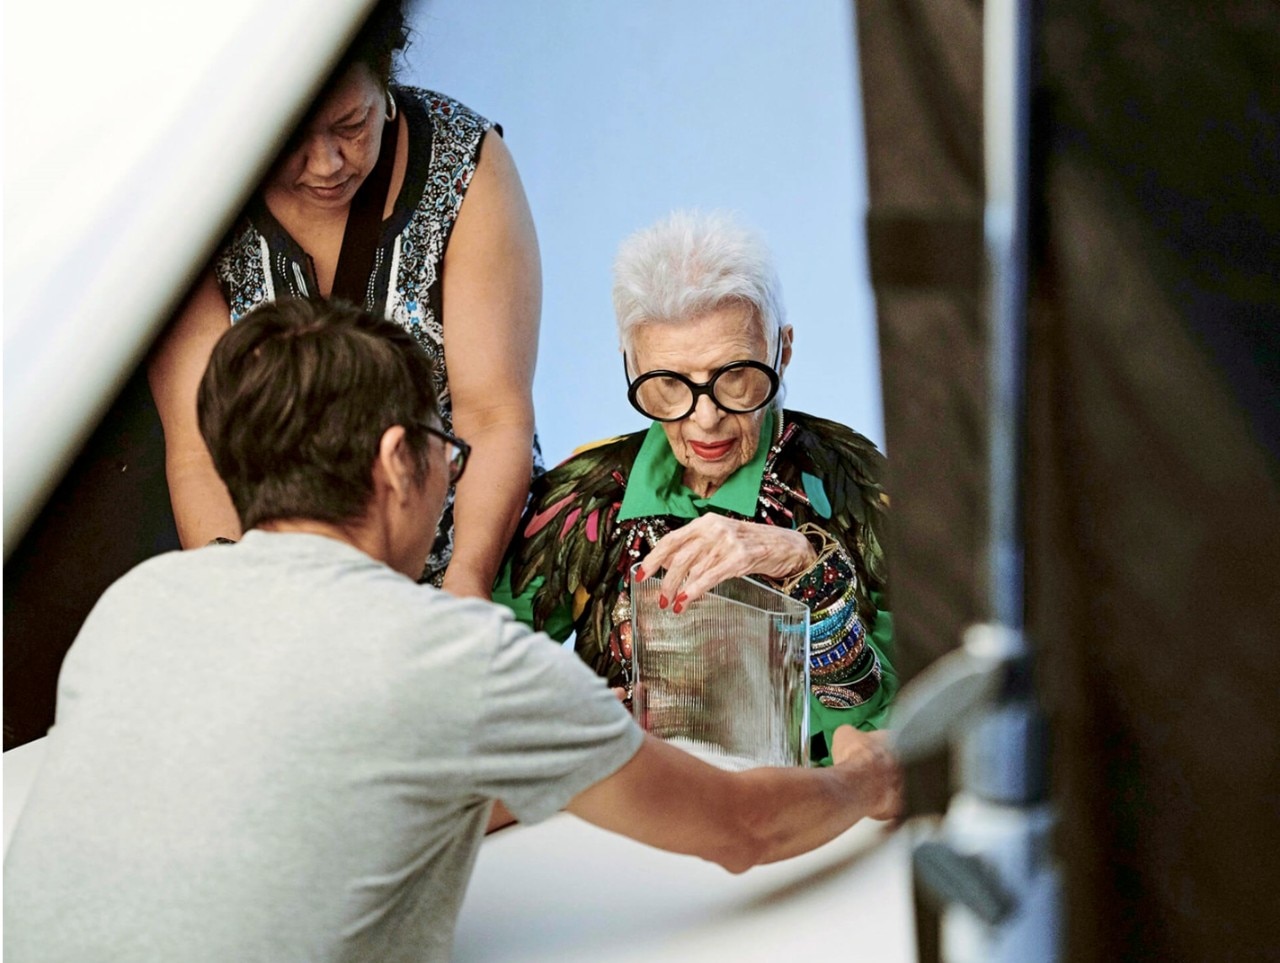 Interview with Iris Apfel: “Who doesn't want to have their own face on their  desk?”